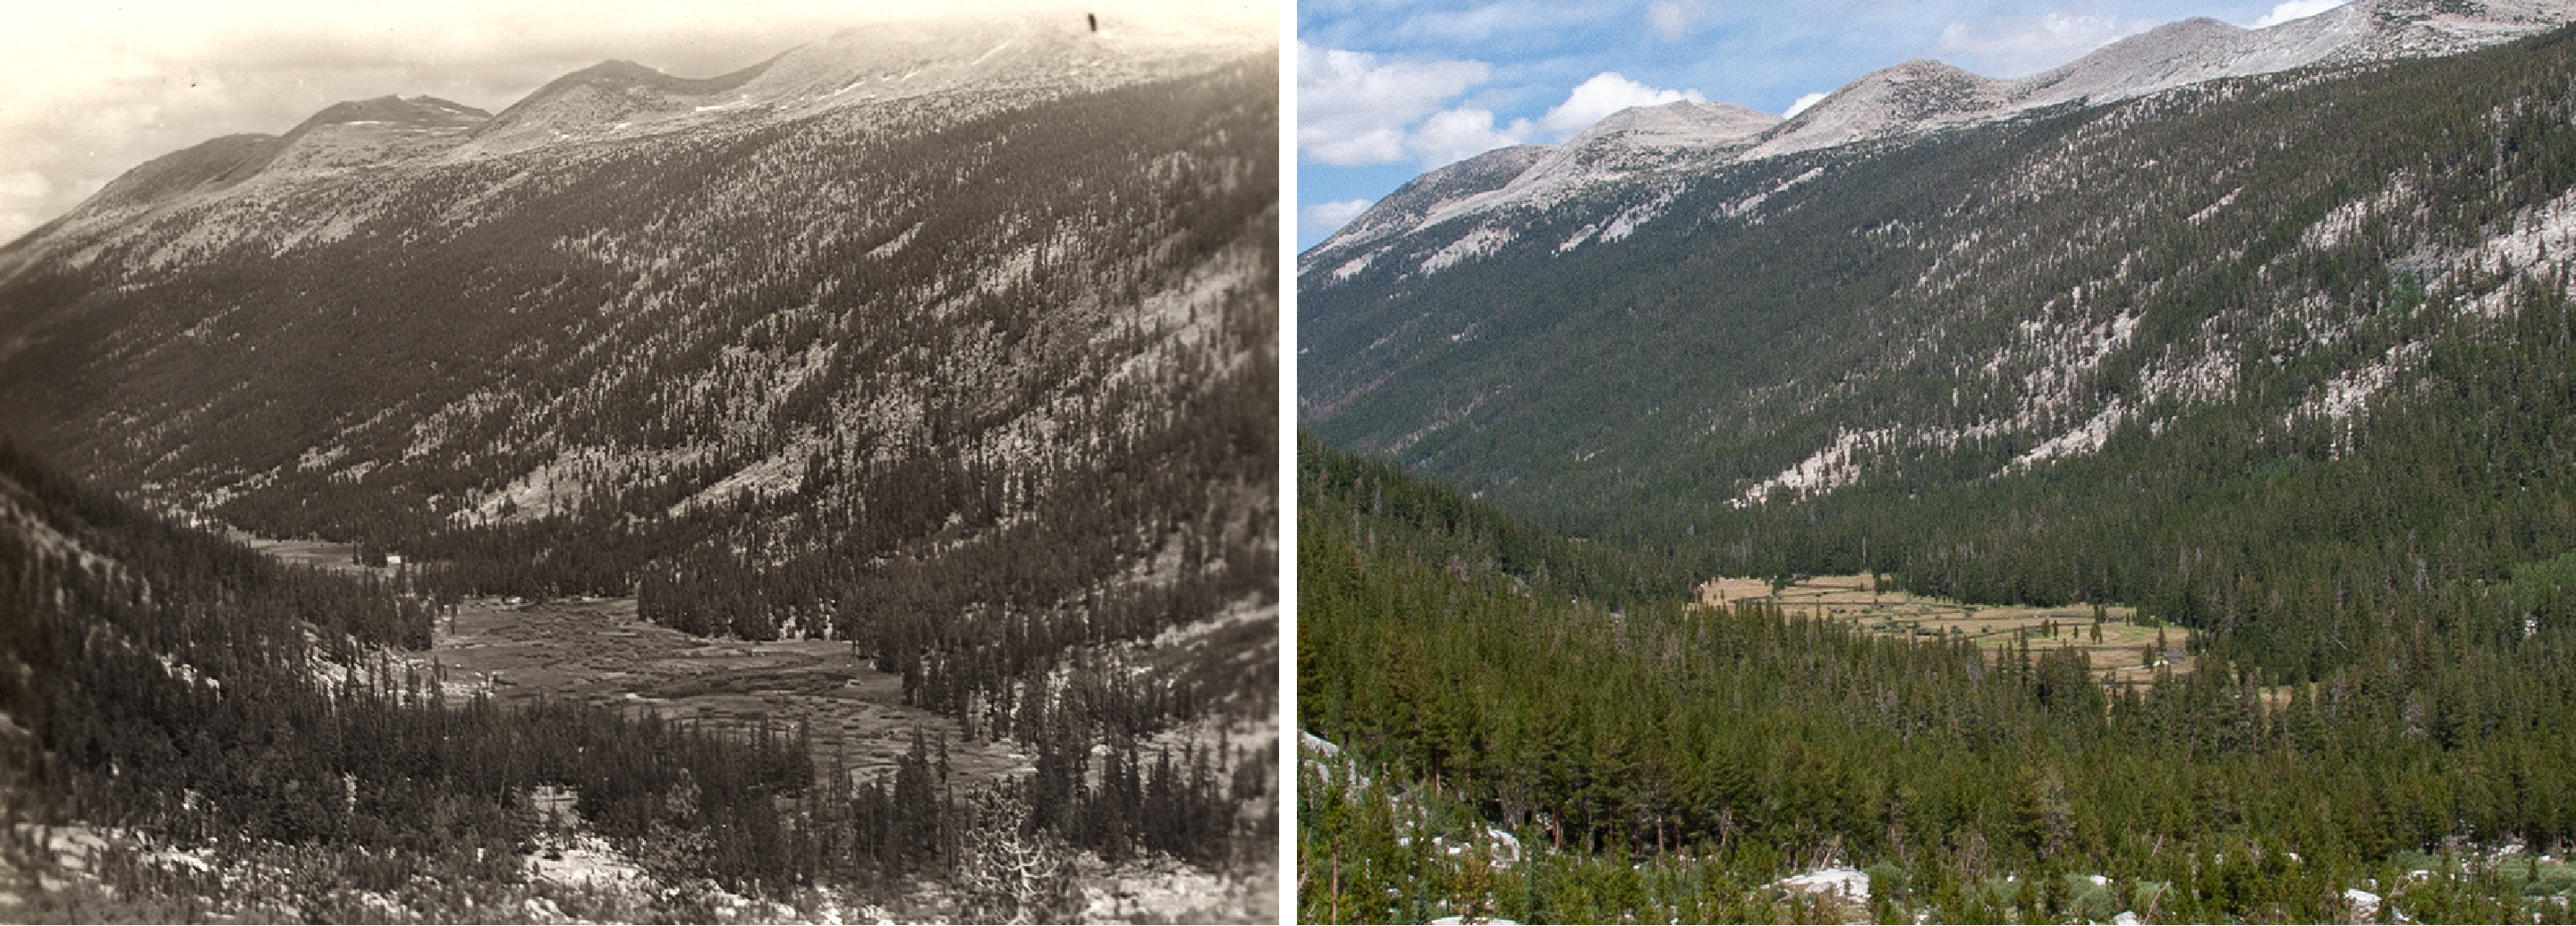 Historical photo of Lyell Canyon shows less dense trees and a lower treeline compared to modern photo.